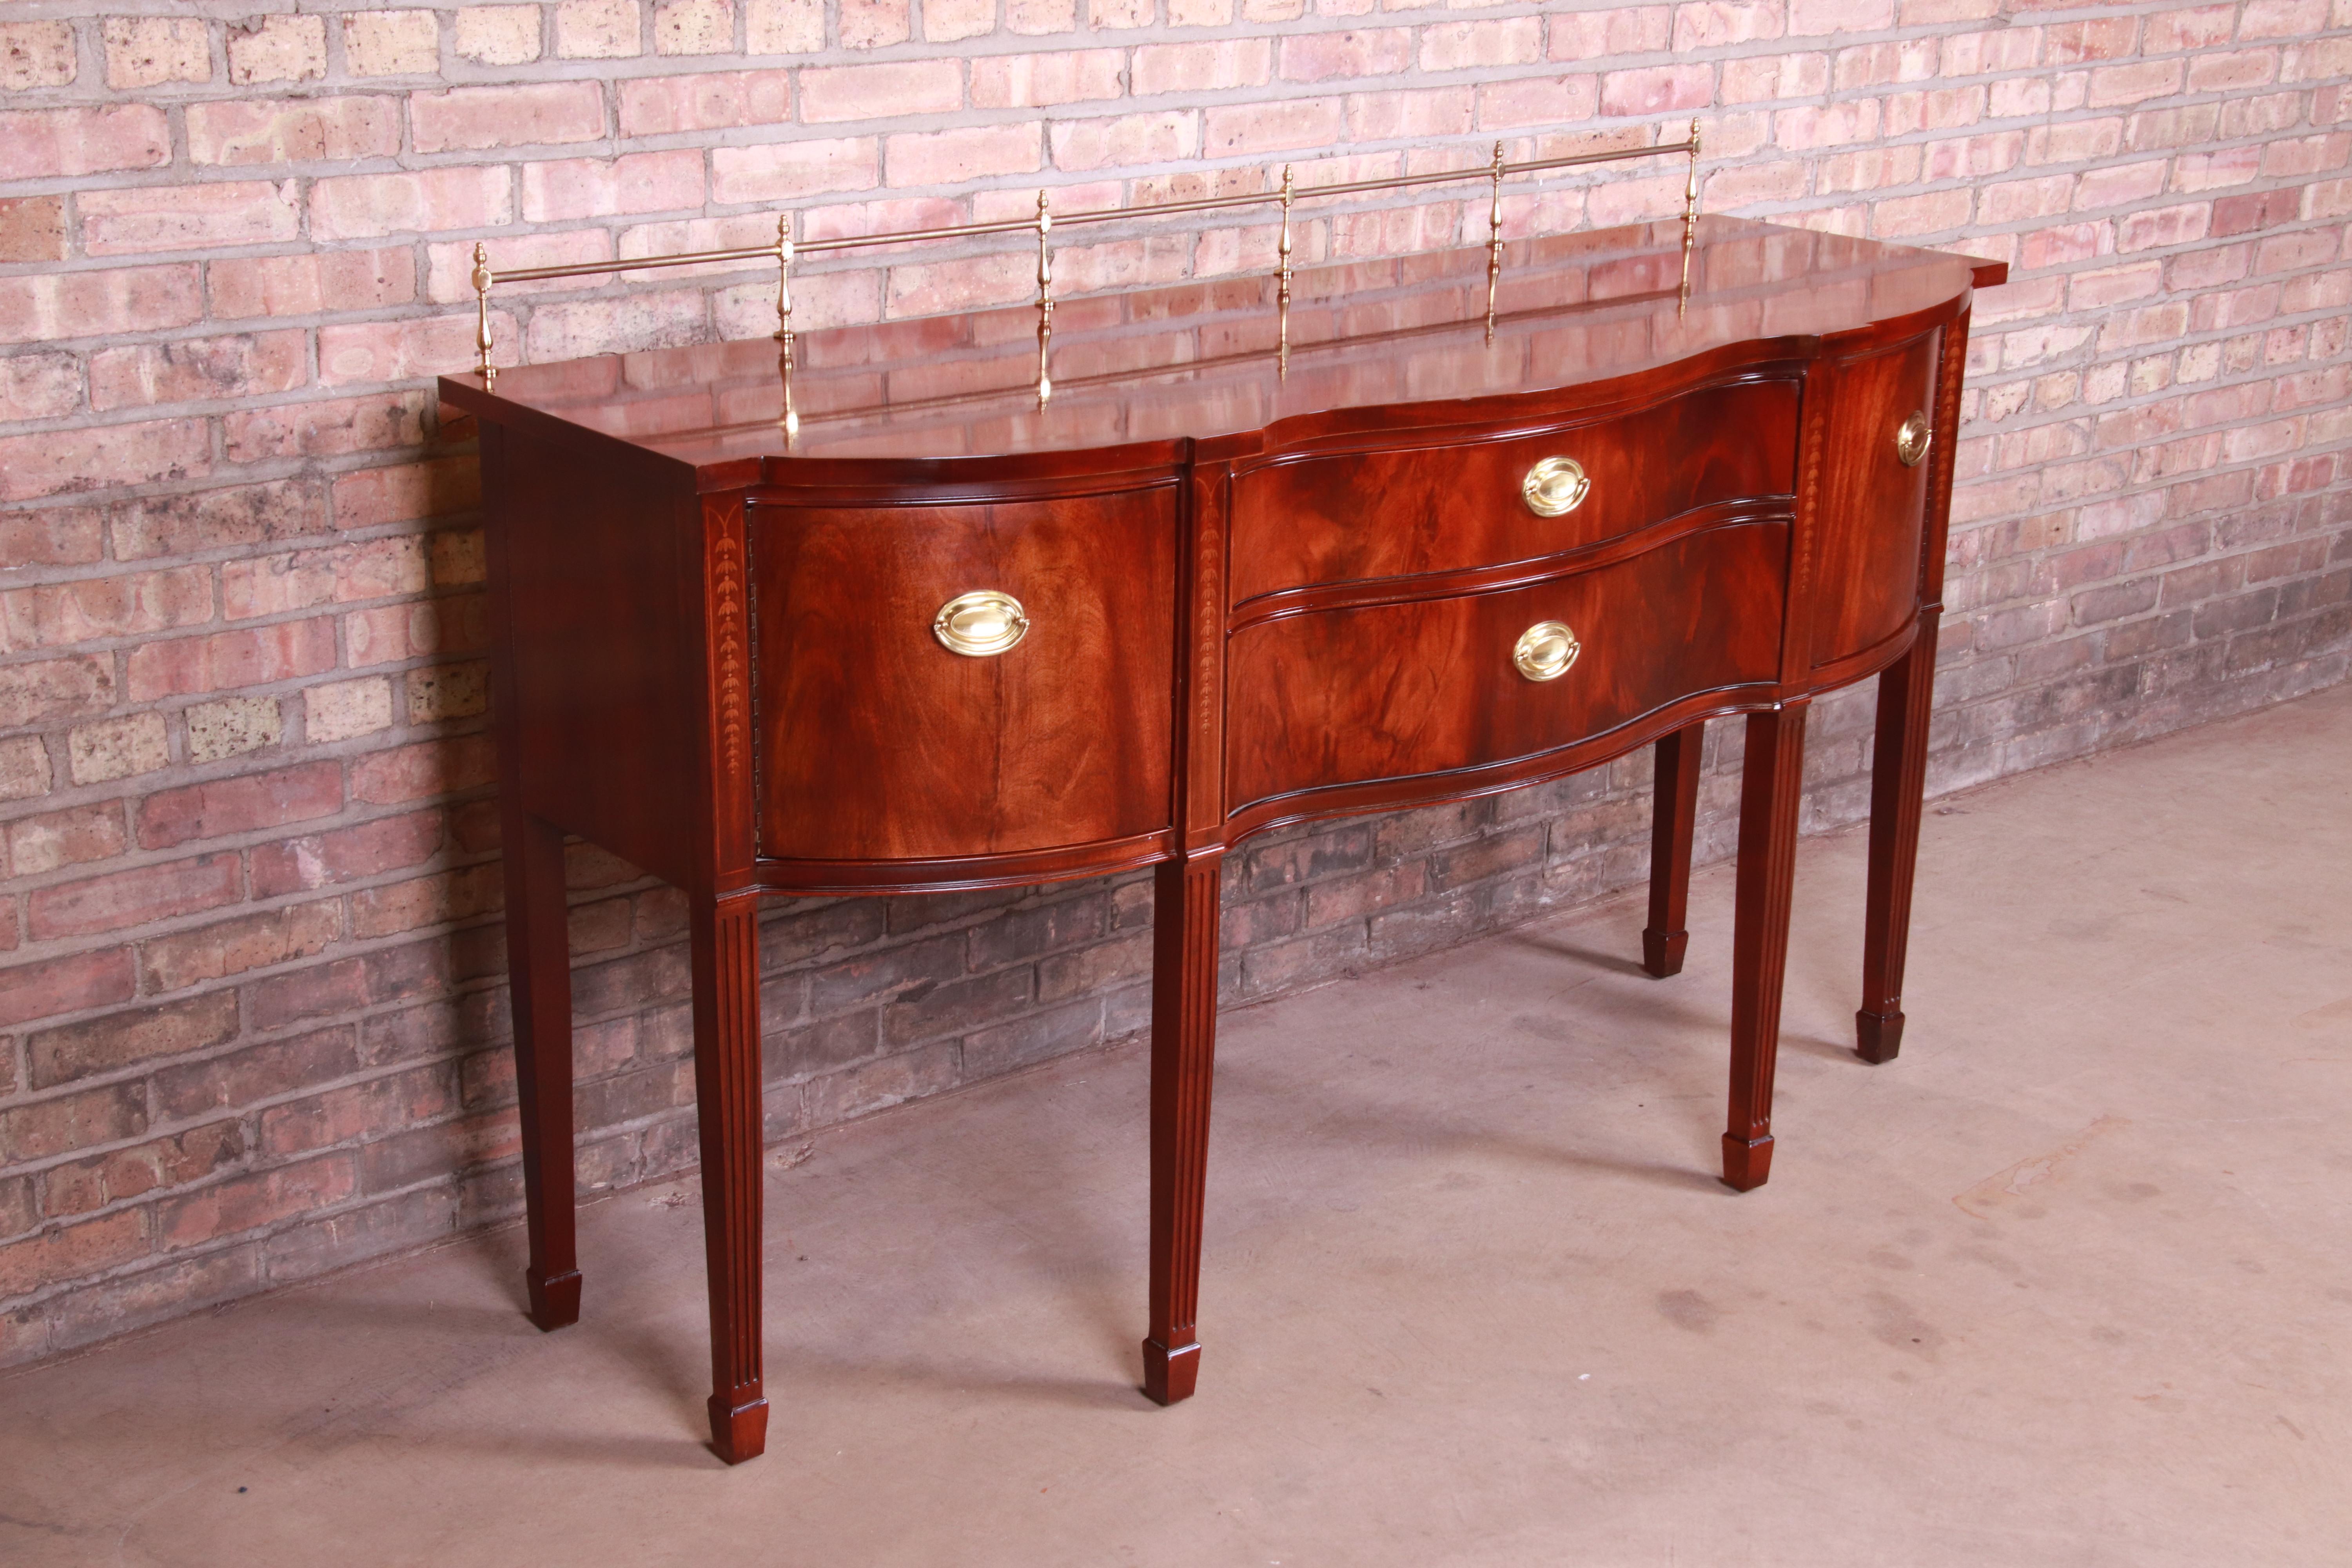 20th Century Thomasville Hepplewhite Flame Mahogany Sideboard Credenza with Brass Gallery